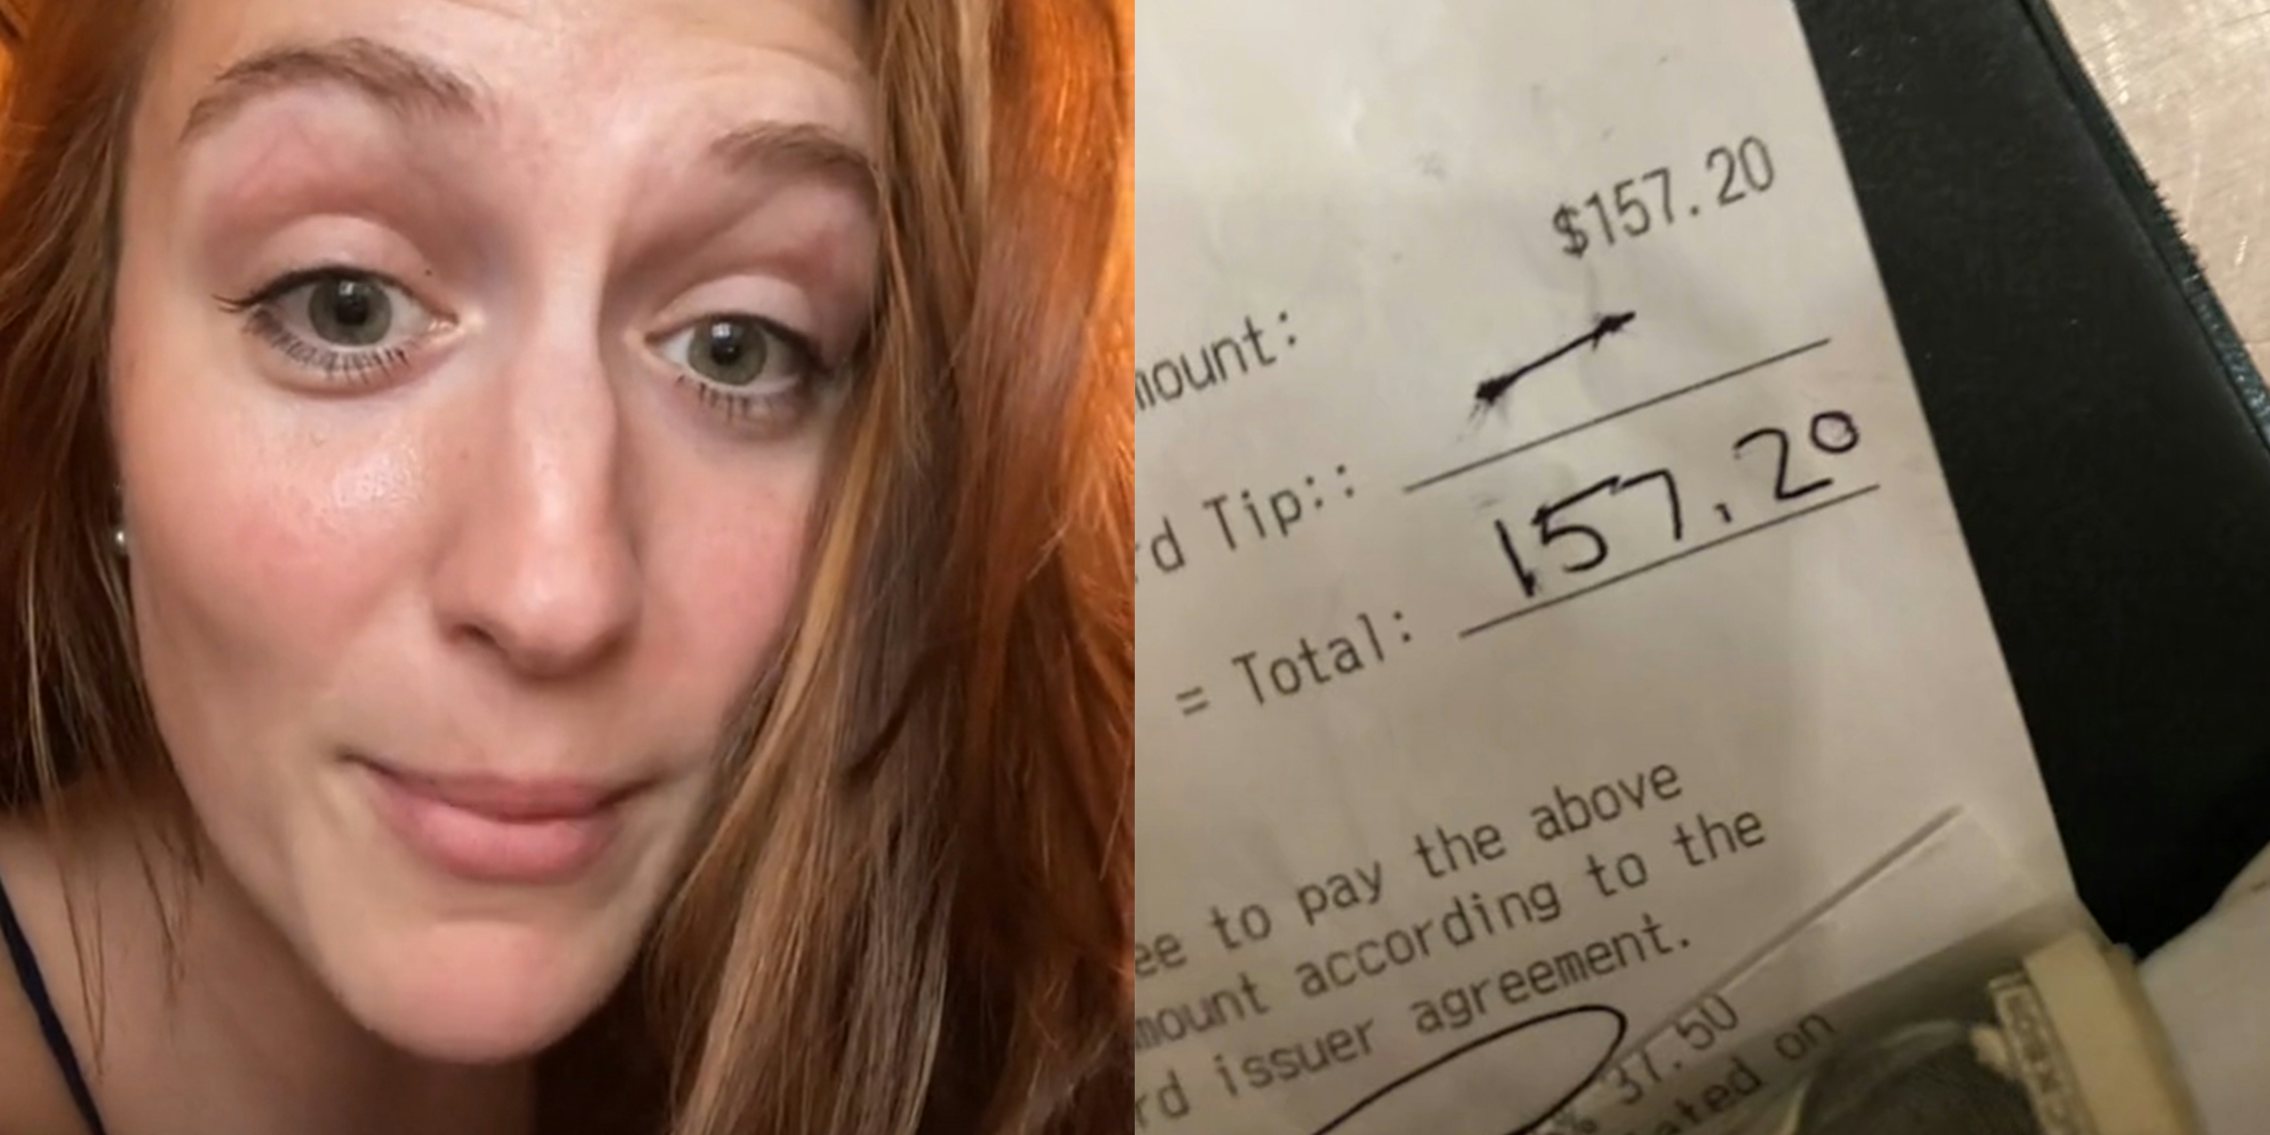 woman with raised eyebrows (l) $157.20 bill with no tip (r)